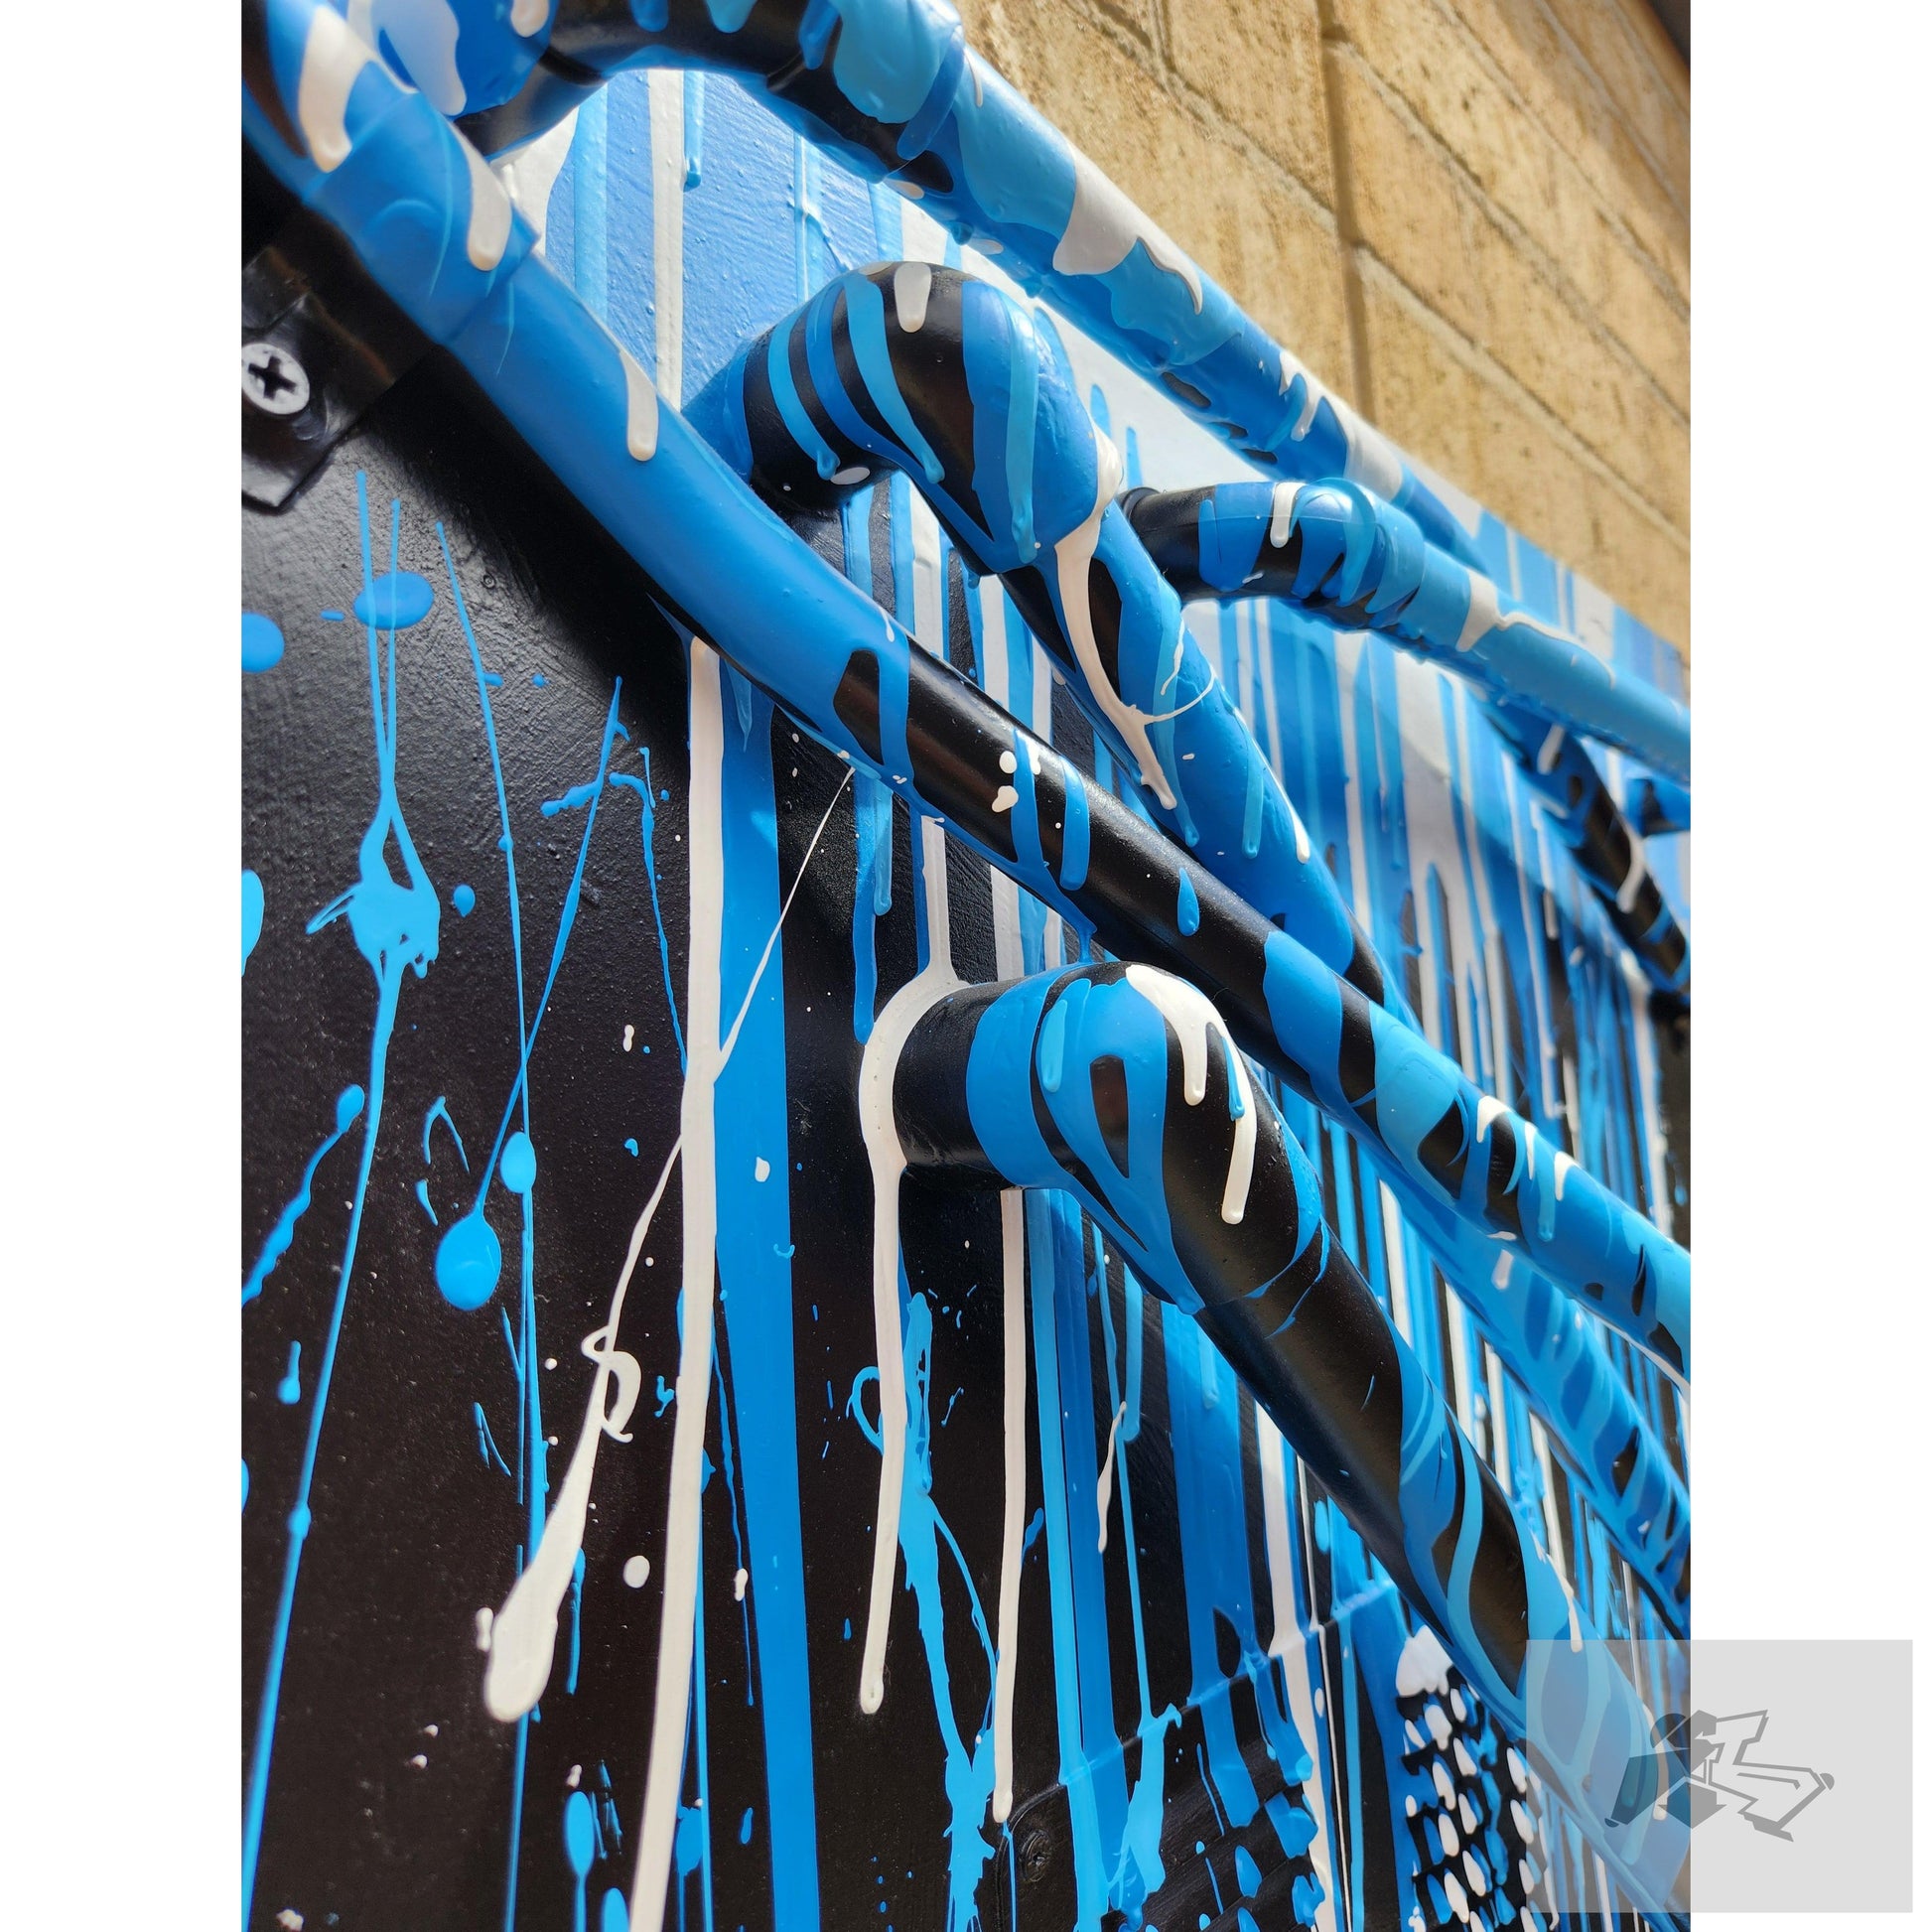 Blue and white drips on black with pipes canvas-Silence Melbourne